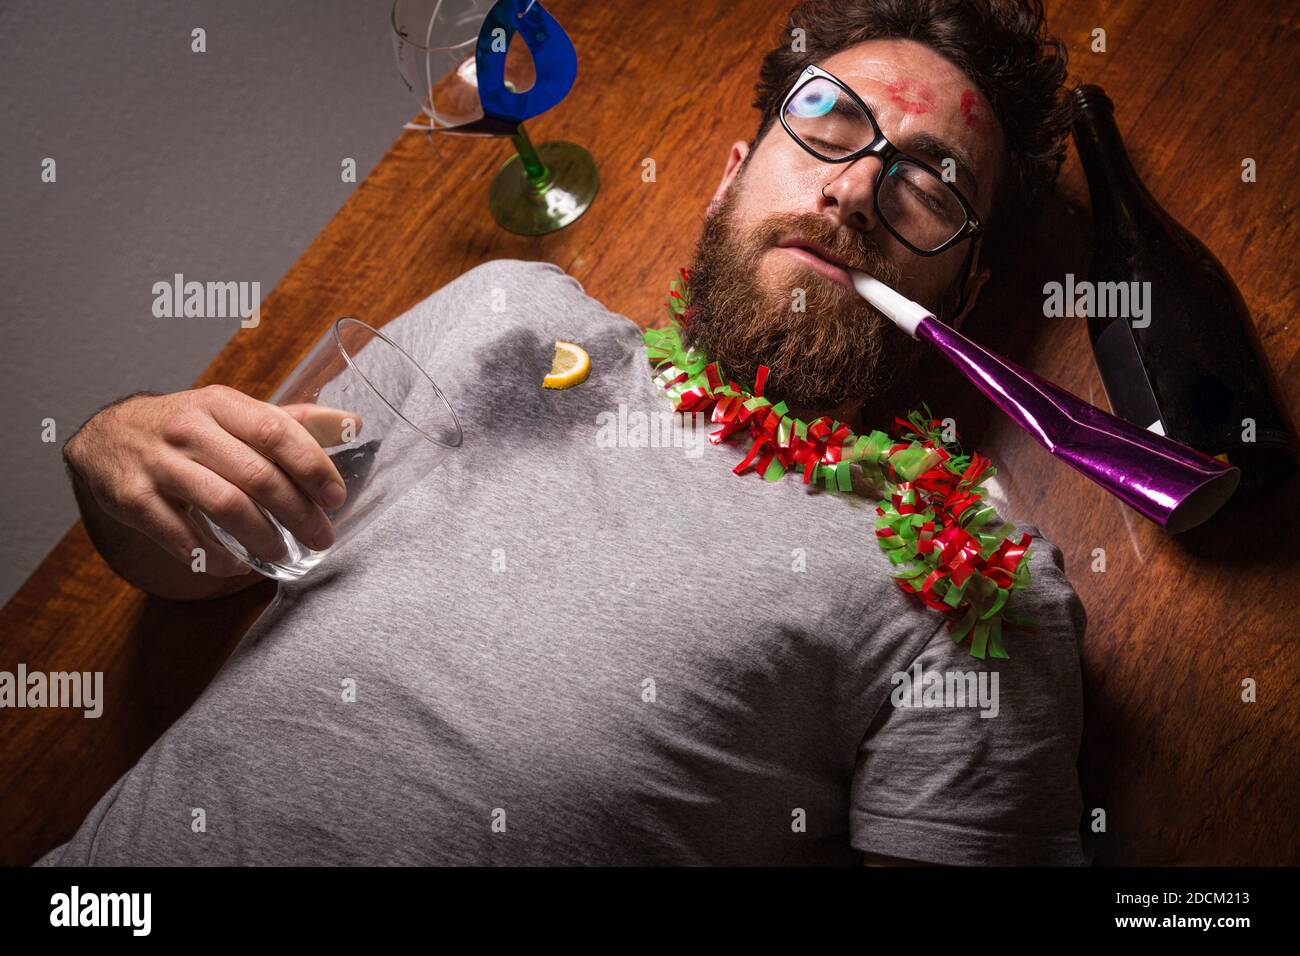 Boy with a hangover after a New Year's Eve party lying on the floor. Stock Photo